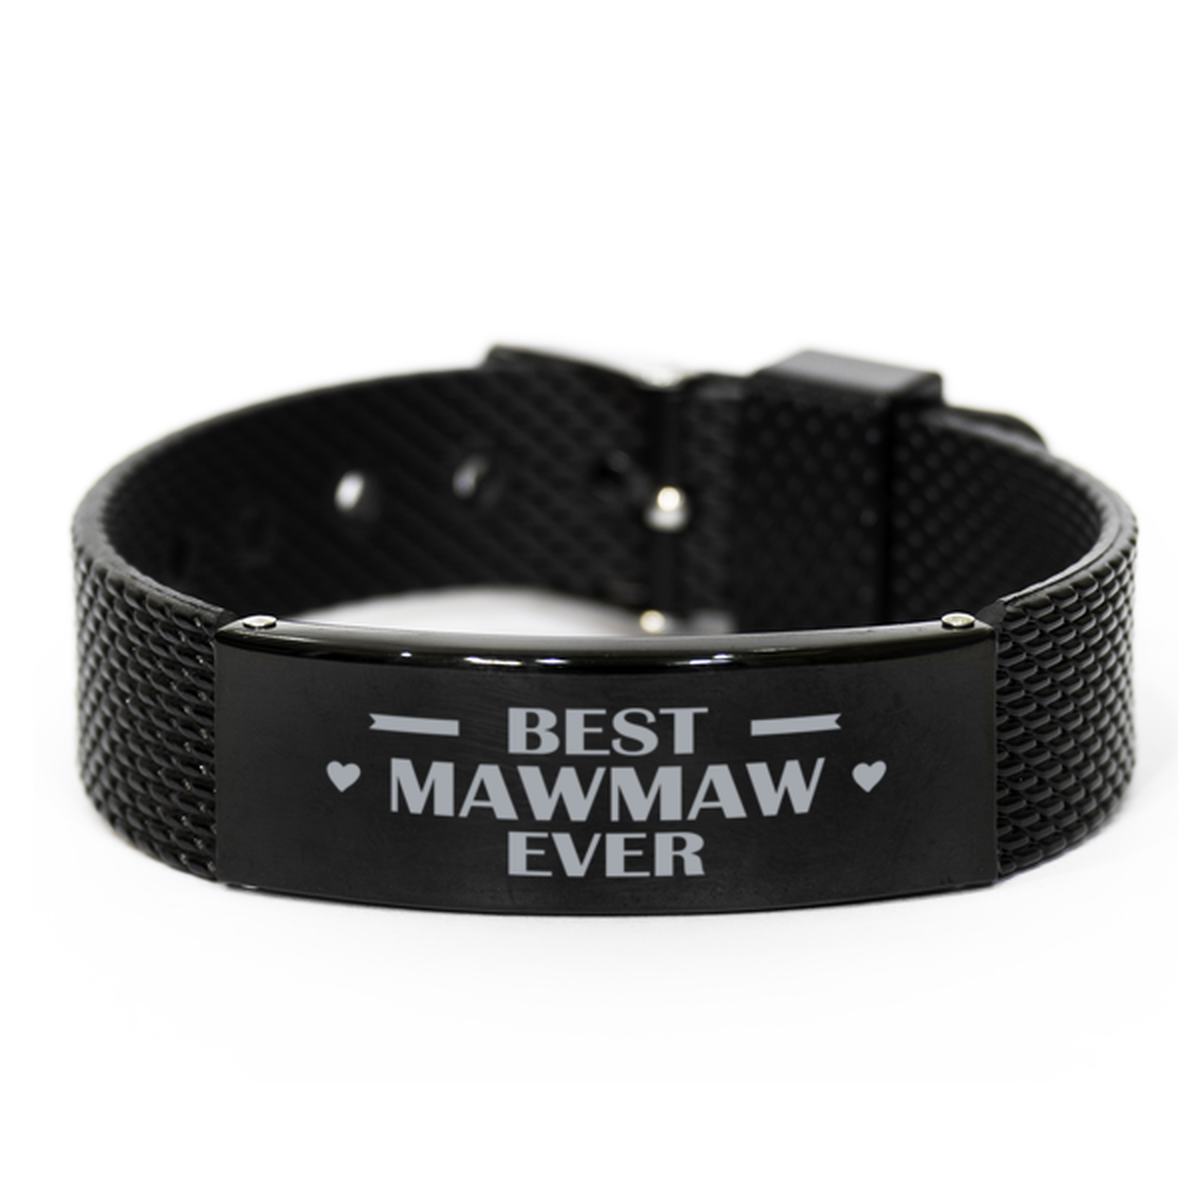 Best Mawmaw Ever Mawmaw Gifts, Gag Engraved Bracelet For Mawmaw, Best Family Gifts For Women